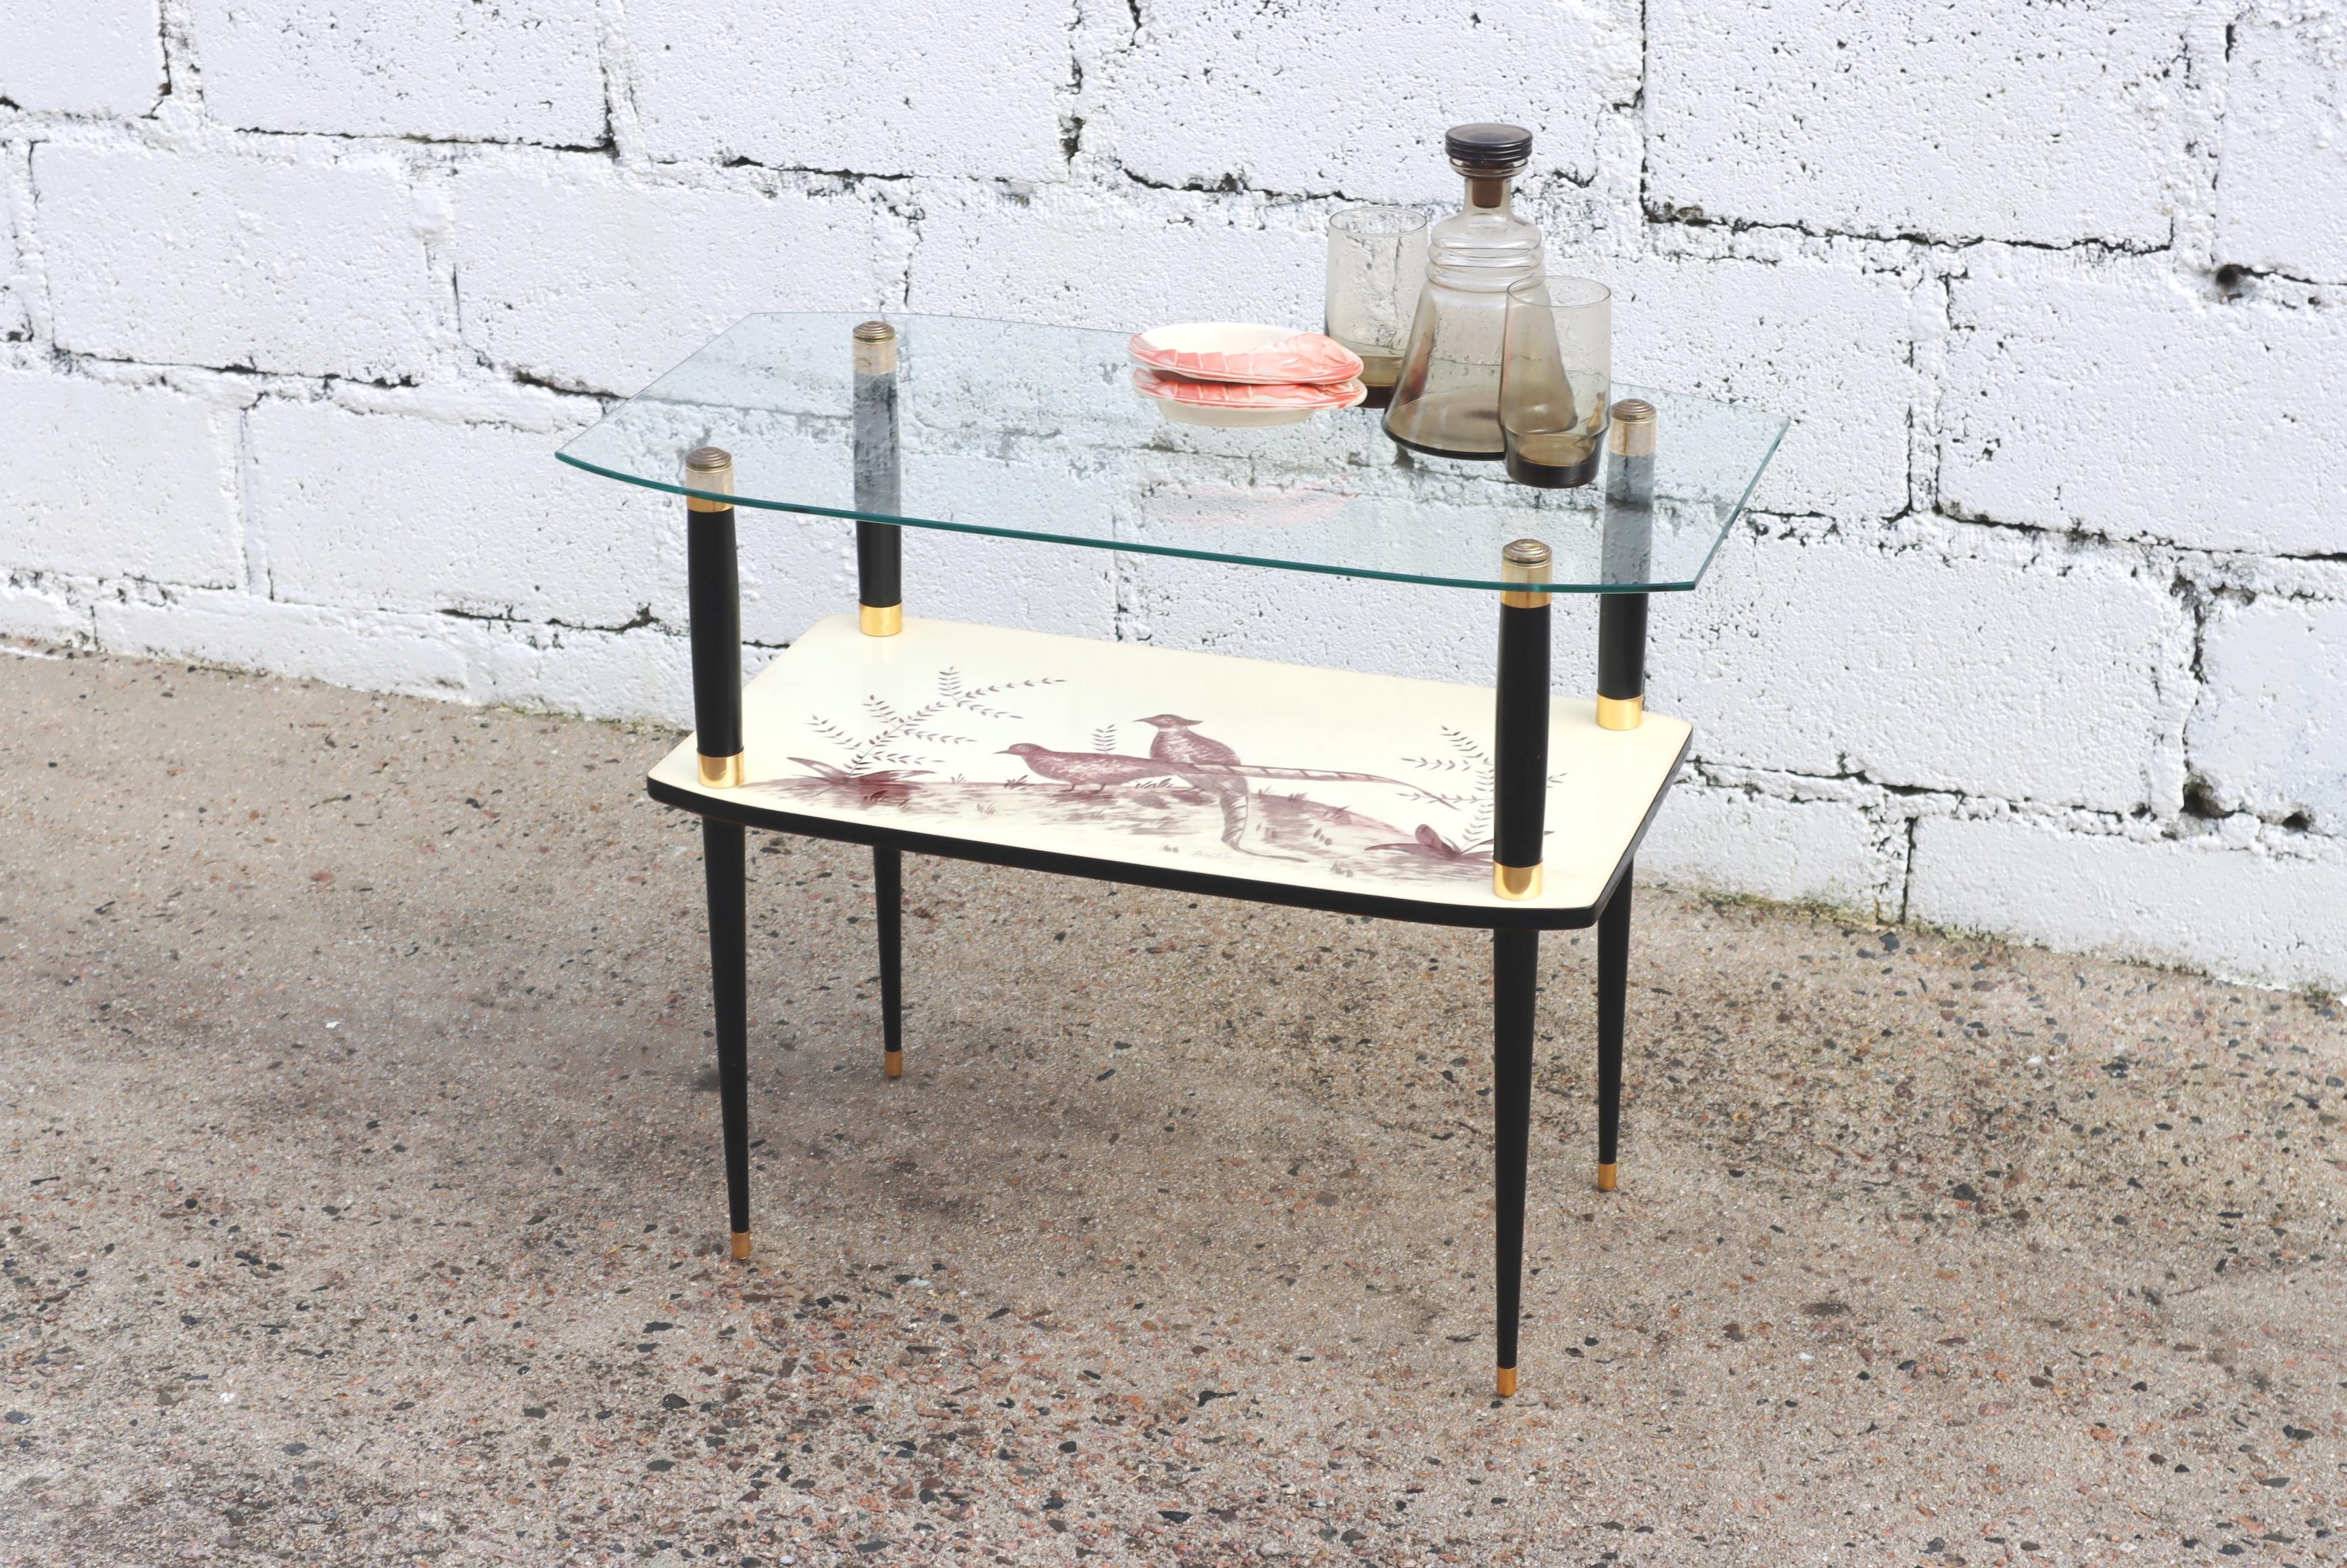 Charming Mid-Century Glass Formica Console Table from the 50s

Slender piece of Furniture with a slightly rounded Glass Top.

The lower Shelf made of Formica is decorated with a Pheasant Motif

in earth Colors on ecru-colored Underground.

Slim legs